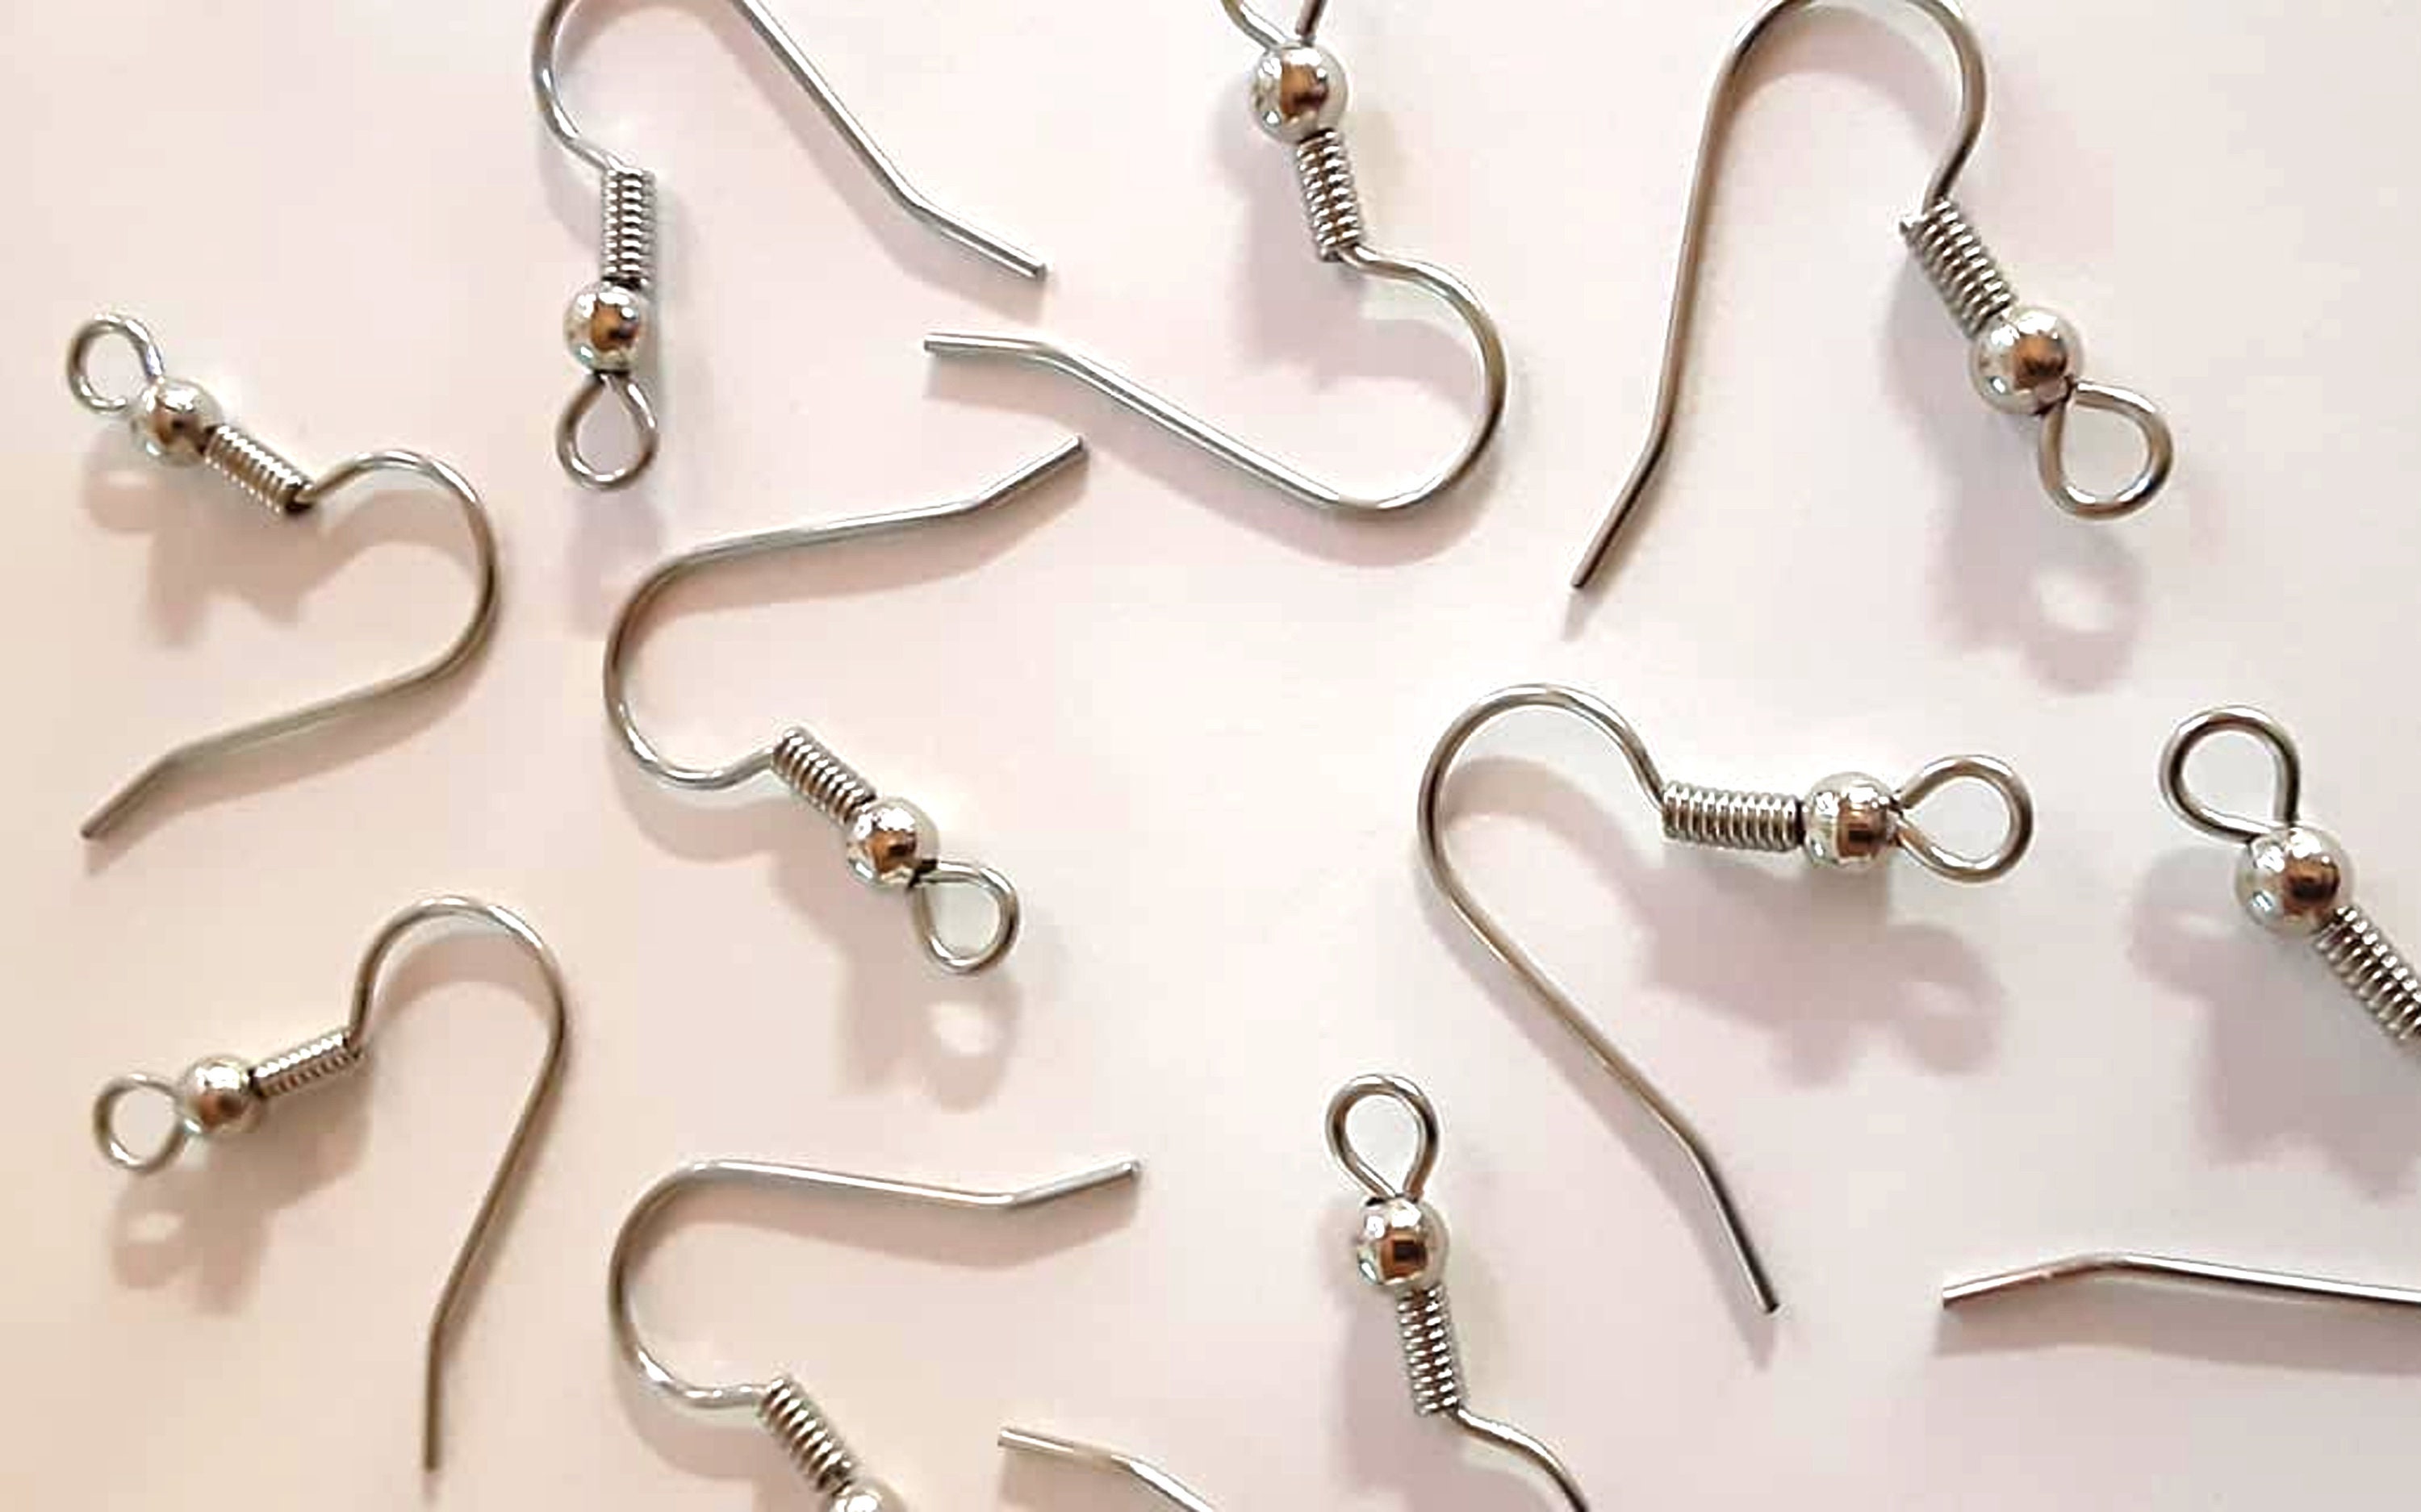 SALE: 5 PAIRS Ear Fishhooks, Fish Hook, Earring, Jewelry Supply, Finding,  Craft Supplies, Kallyco on  